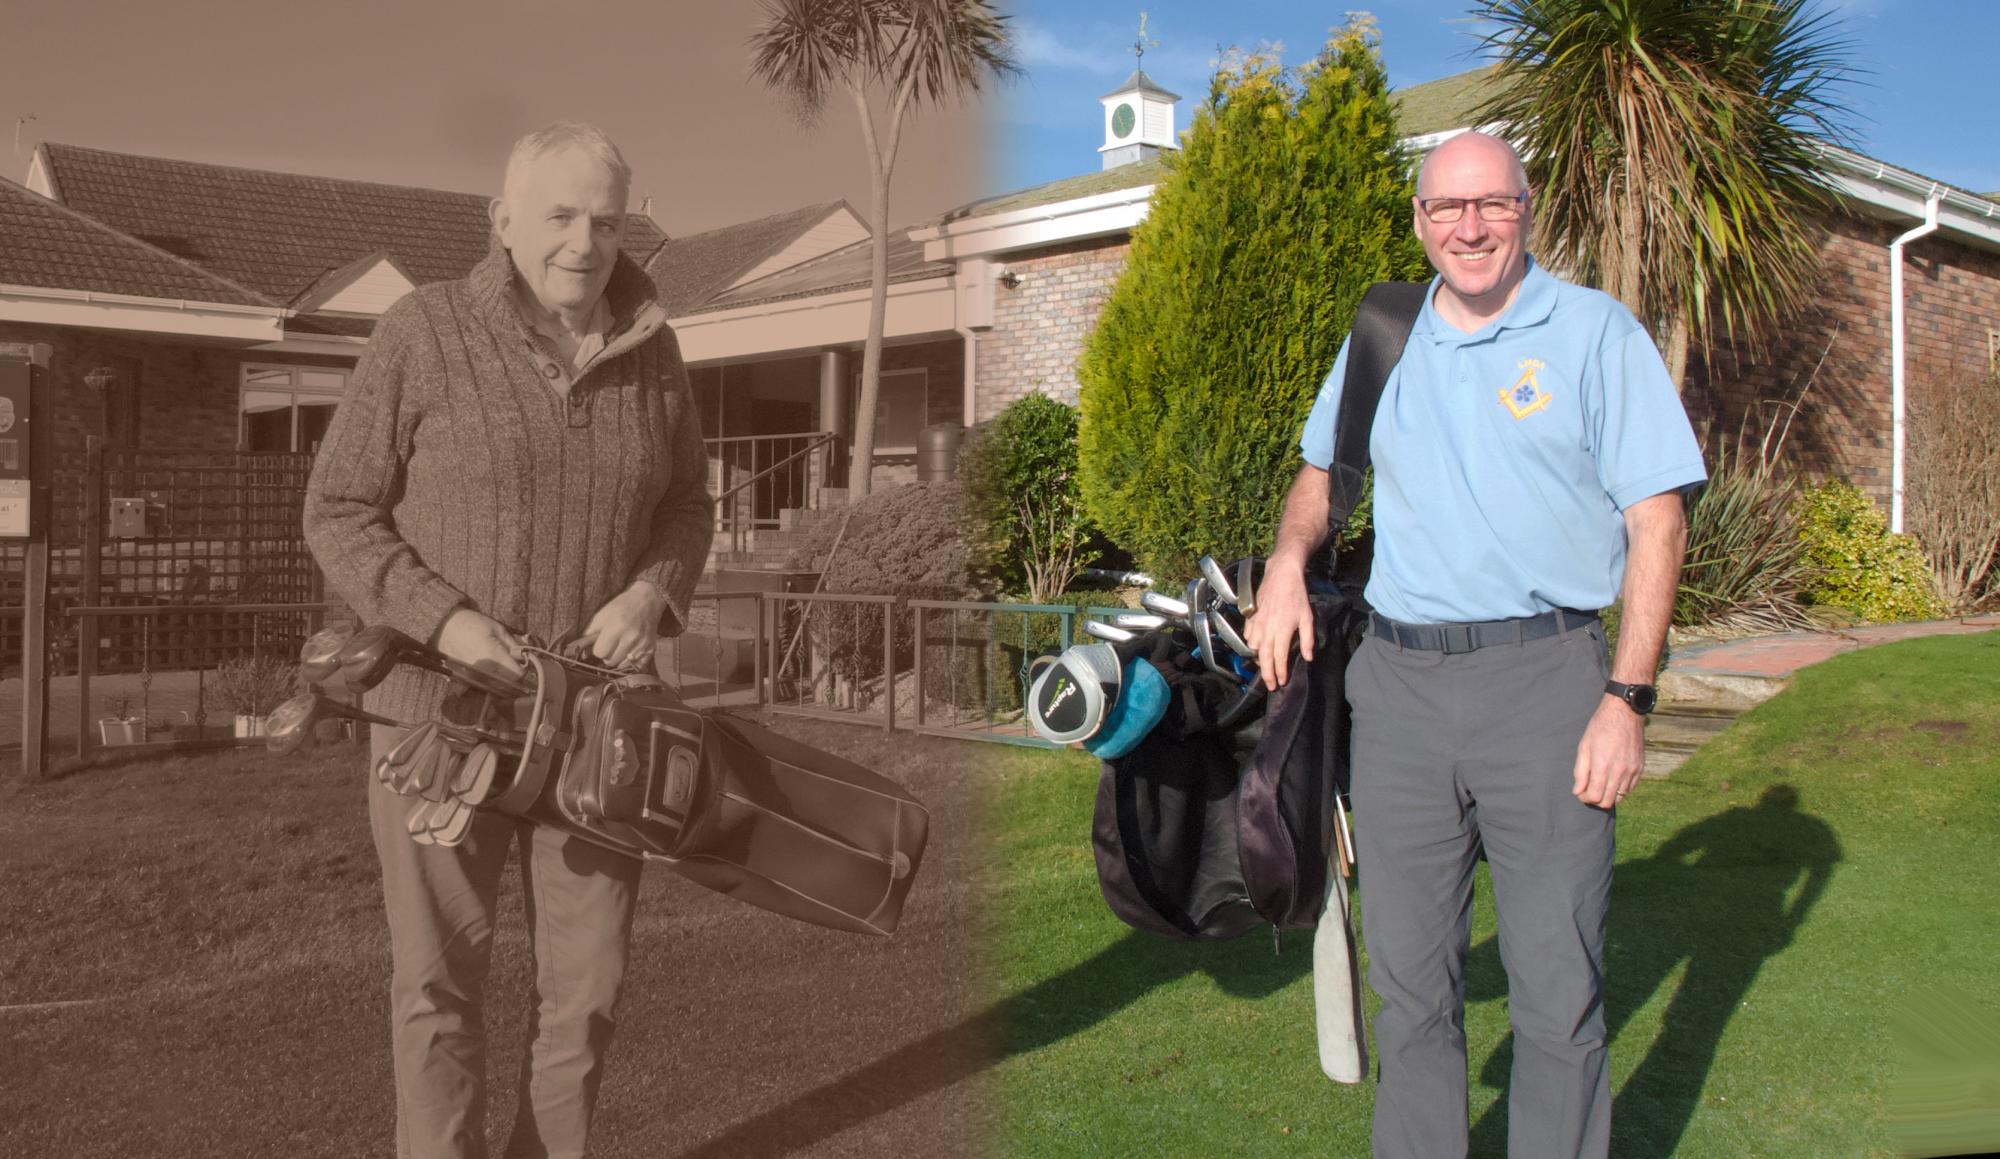 Centenary match organisers Mick Wright, left, and Barrie Graham illustrate the past and present of the Lincolnshire Masonic Golfing Association